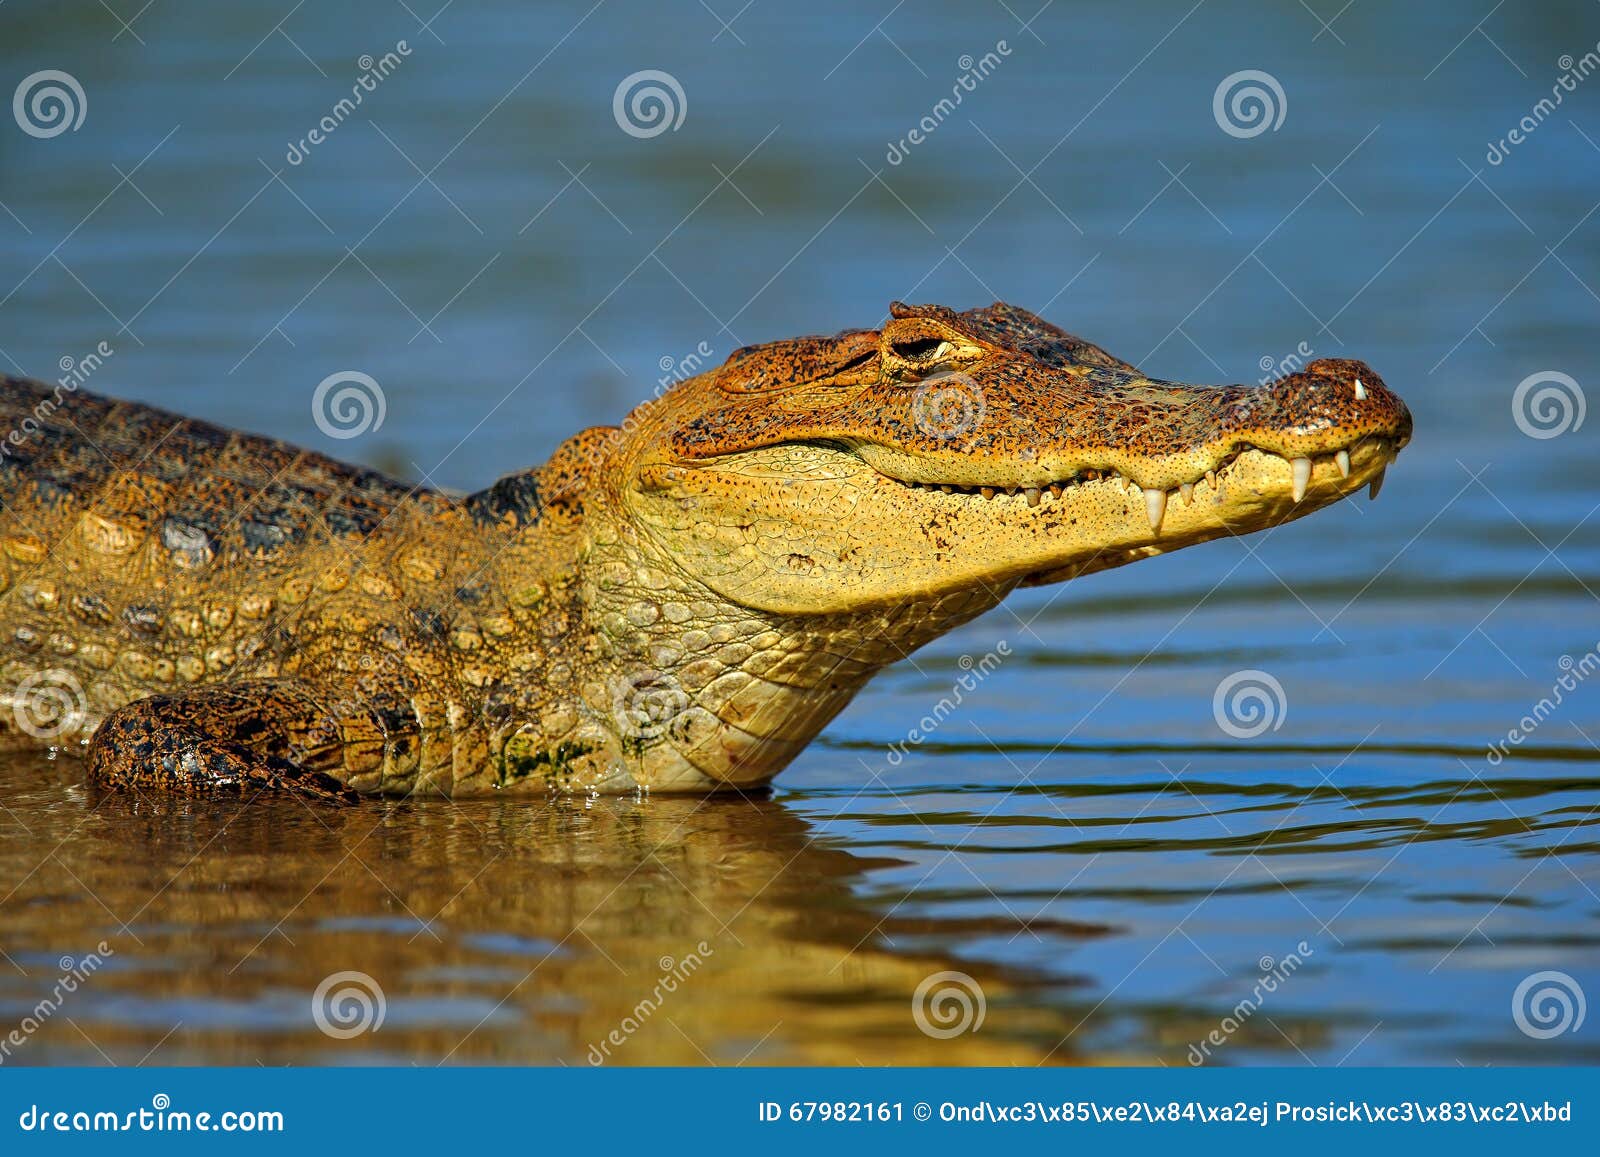 portrait of yacare caiman in blue water, cano negro, costa rica